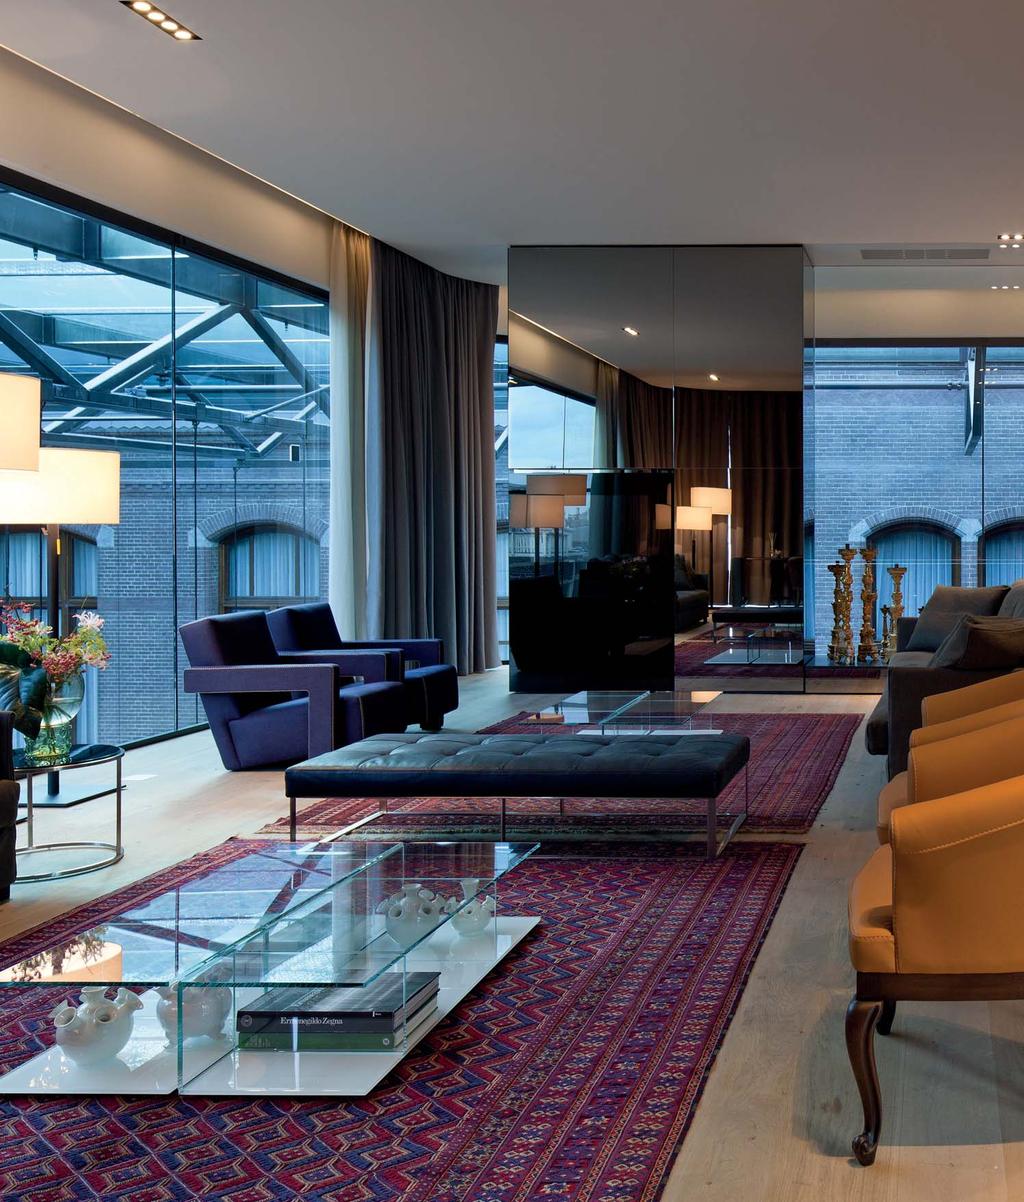 Penthouse Suite signature suites Constructed almost entirely out of glass, the 170 sqm (1830 sqft) Penthouse Suite is an extravagant, elegant space nestled in the hotel overlooking the Conservatorium